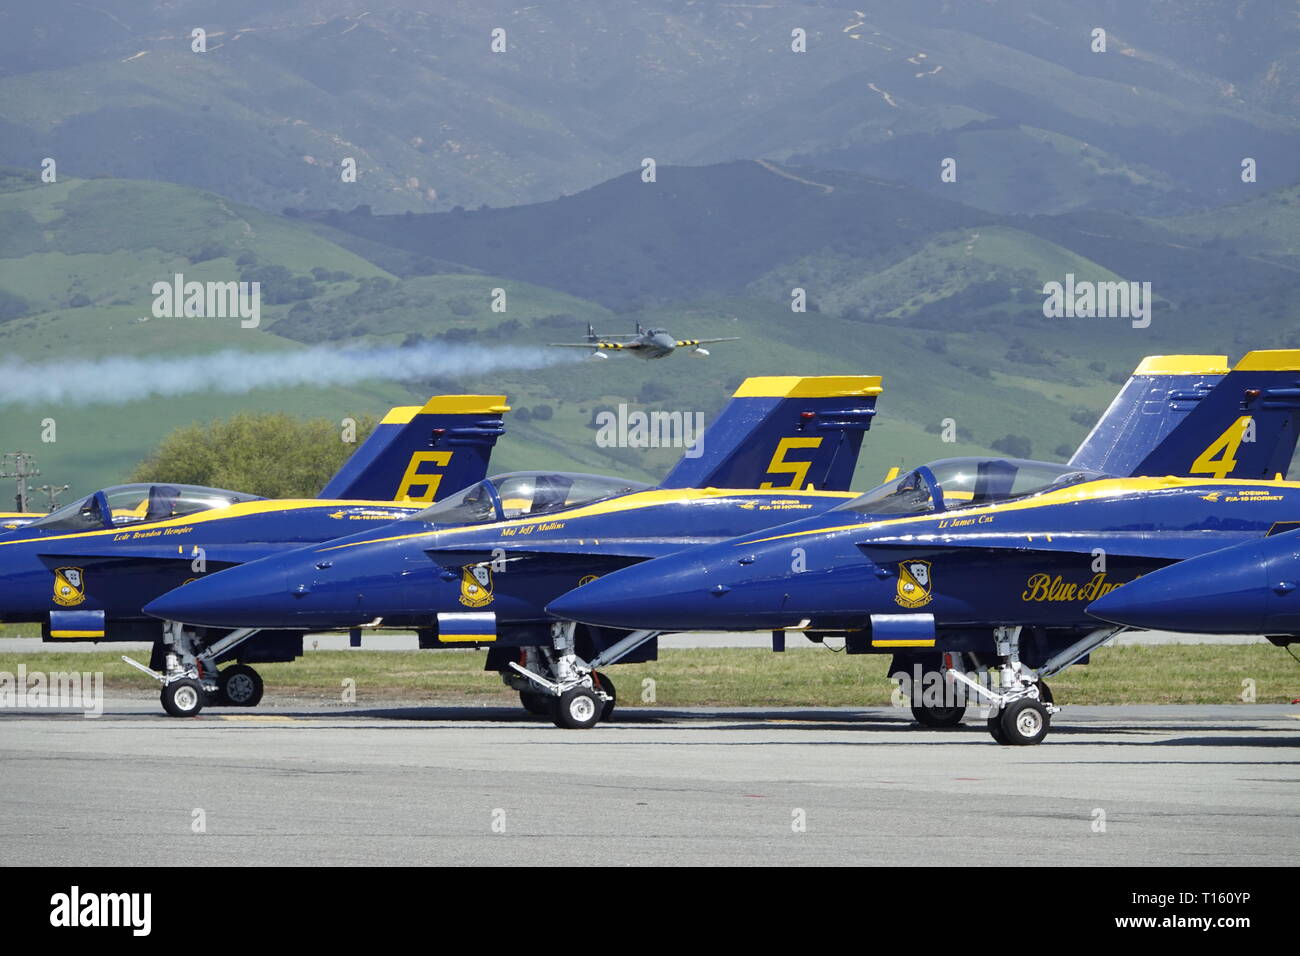 California, USA. 23rd Mar, 2019. 23rd March, 2019   Salinas, California, USA      Scvenes from the annual  Salinas Air-Show, featuring the US Navy 'Blue Angels' arobatic team: here Jerry Conley in the post WW2 Vampire jet careers over the jets of the Blue Angels  at 450 mph. Credit: Motofoto/Alamy Live News Stock Photo